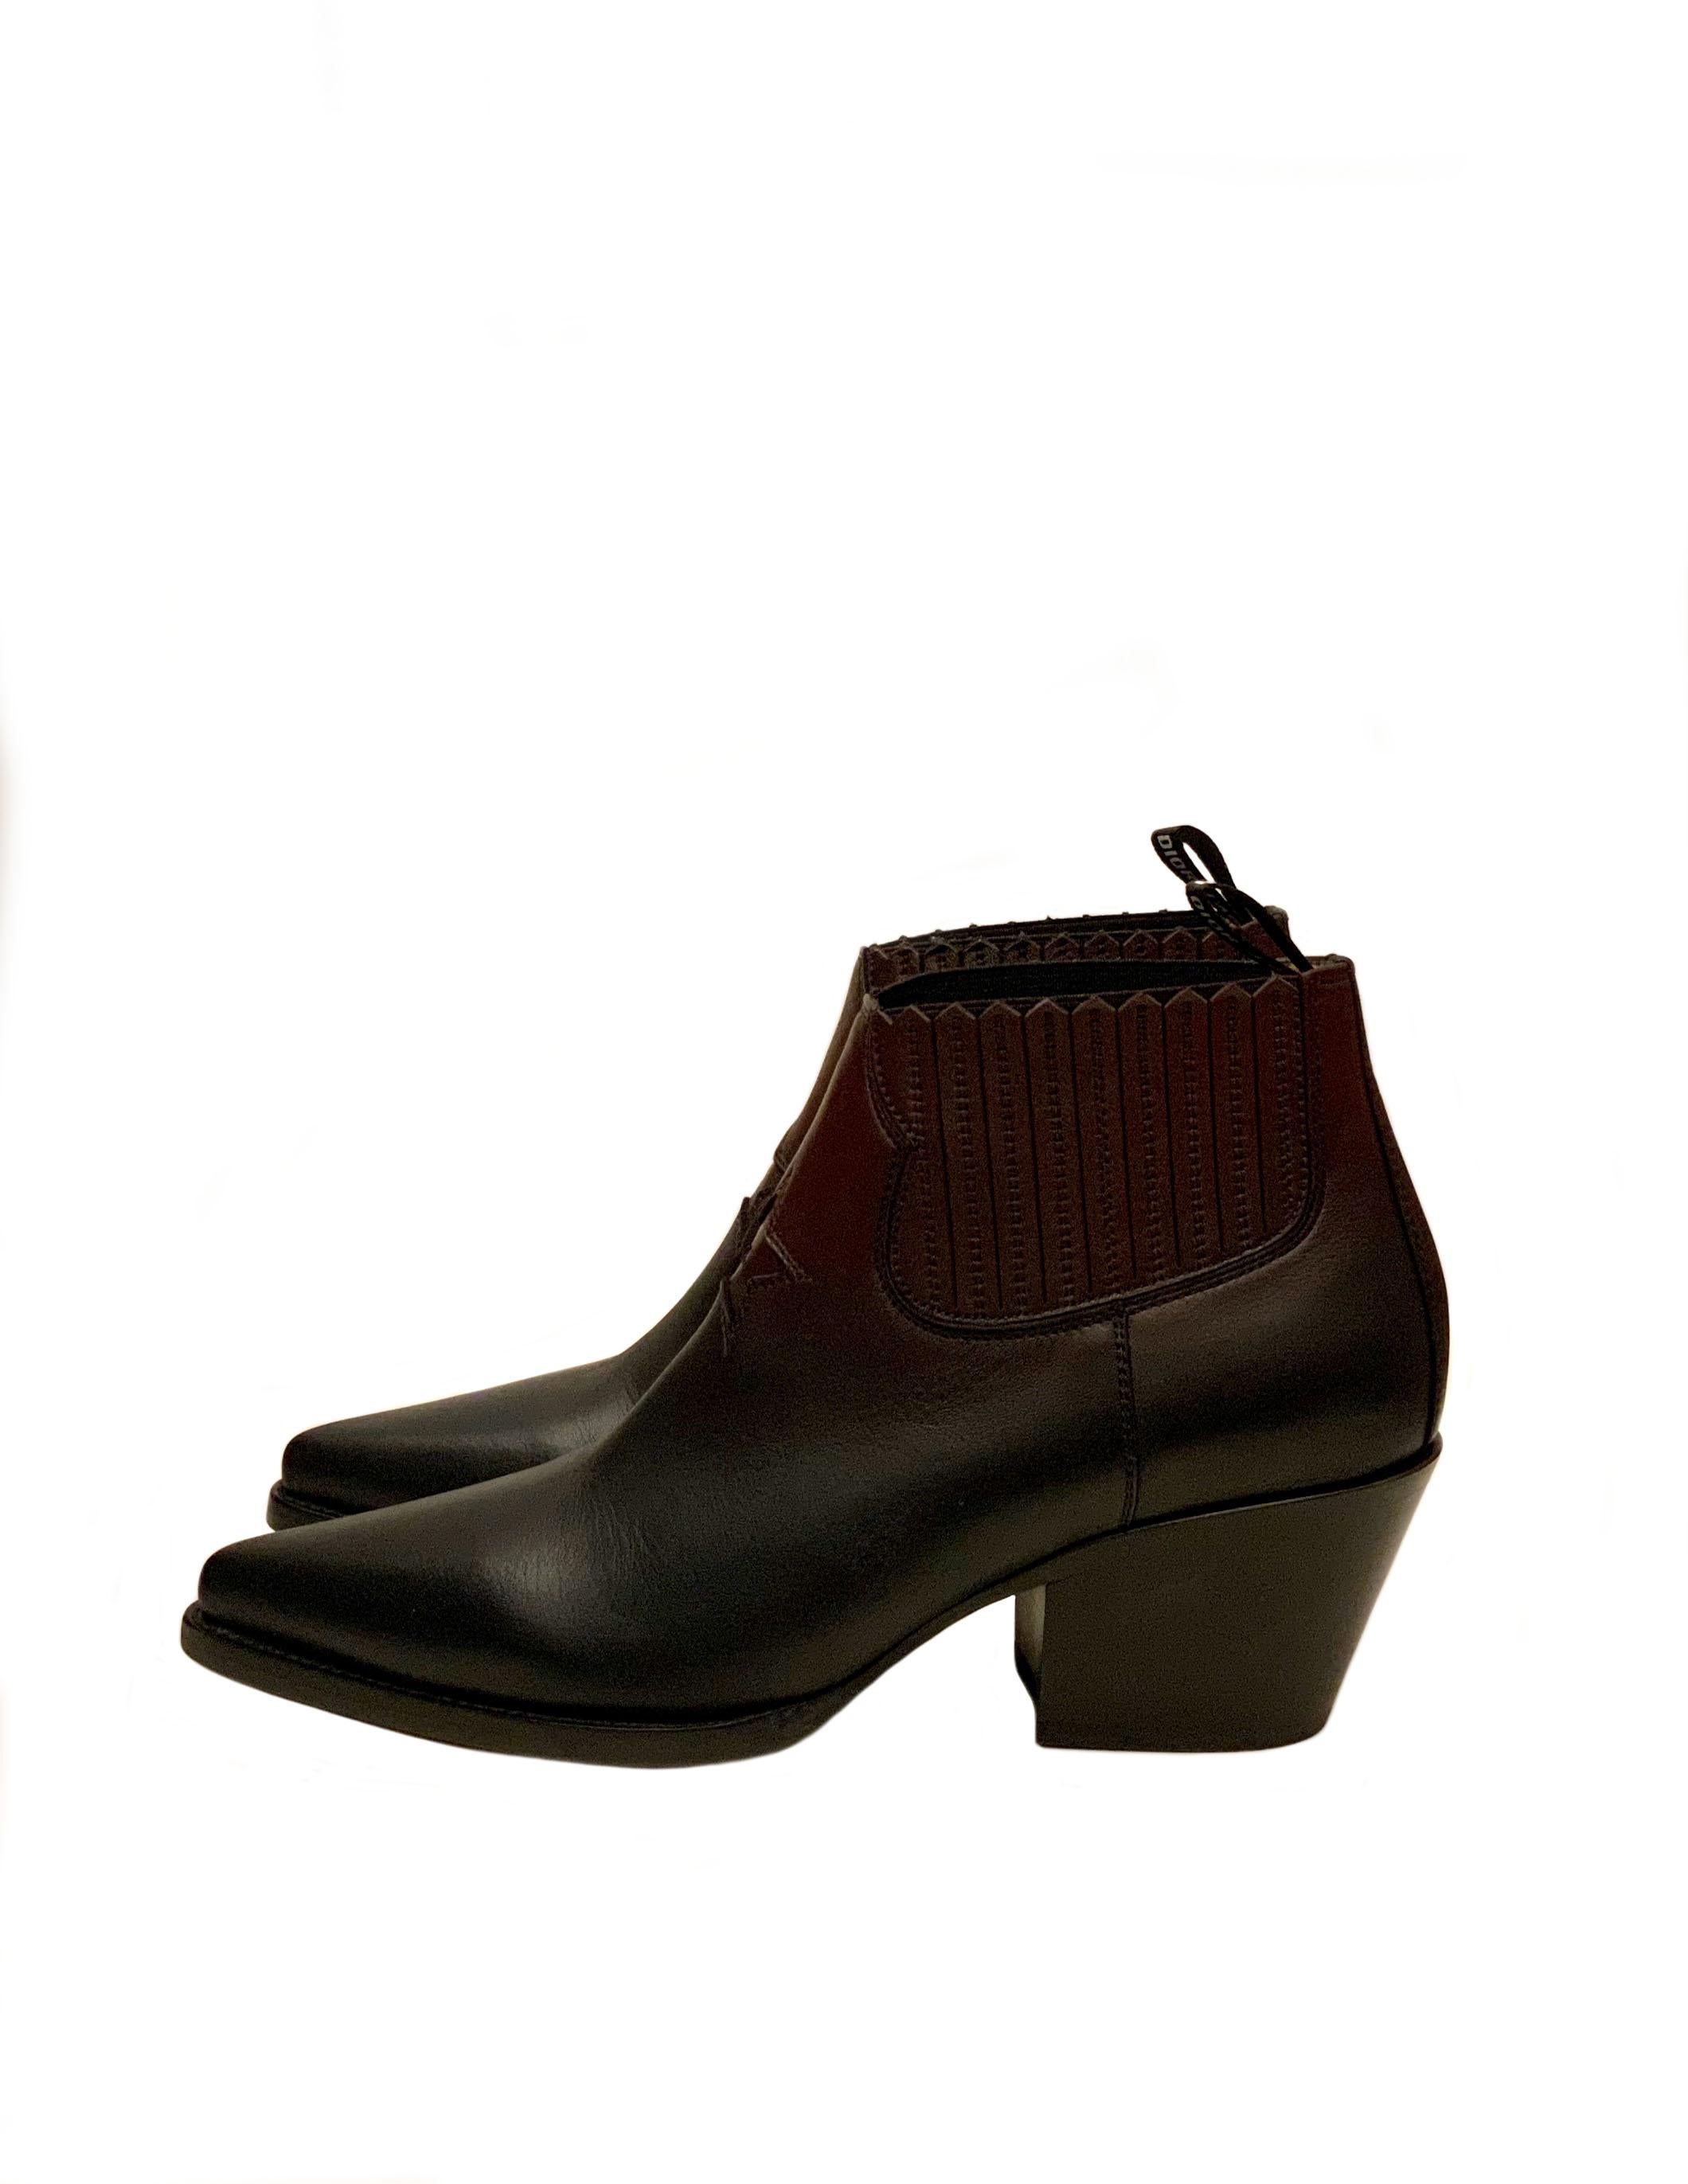 These pre-owned but New ankle boots from the house of Christian Dior are crafted in black and burgundy matt calfskin leather embellished with a star on the upper, honour to Christian Dior.

Collection: 2020
Material: calfskin leather
Insole and